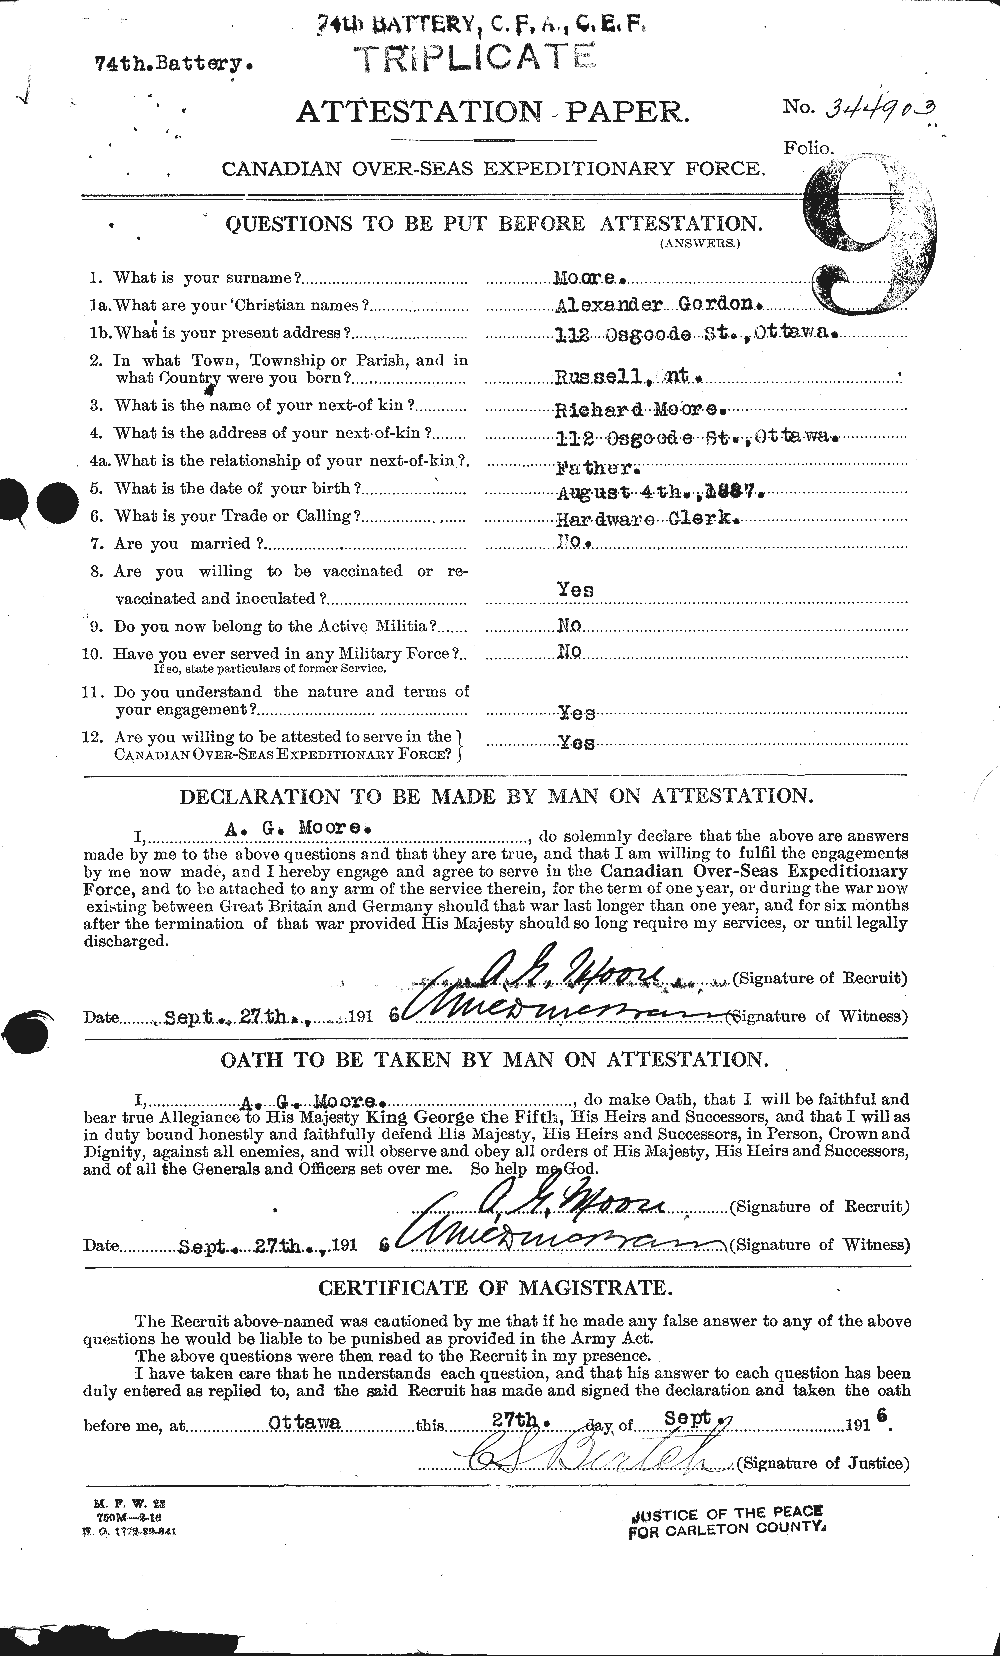 Personnel Records of the First World War - CEF 506367a